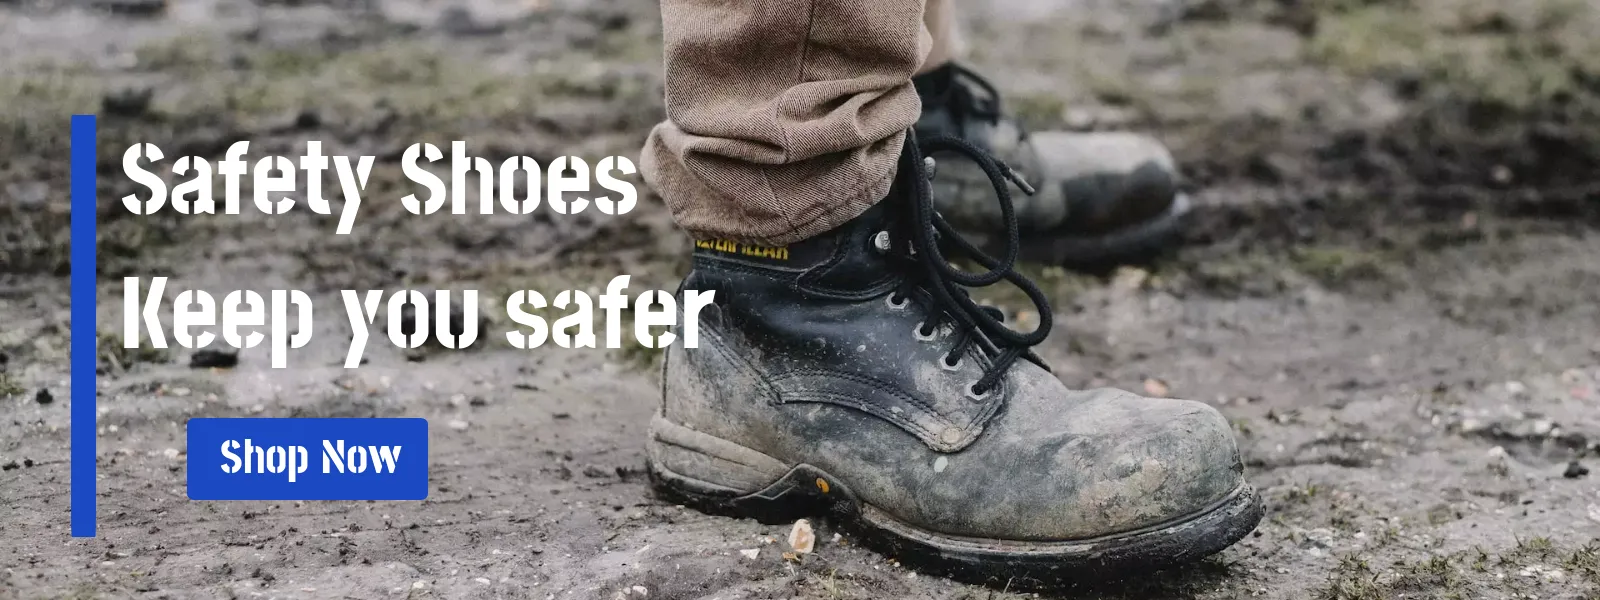 Best Work Boots & Safety Shoes For Sale -  Shopifo.com